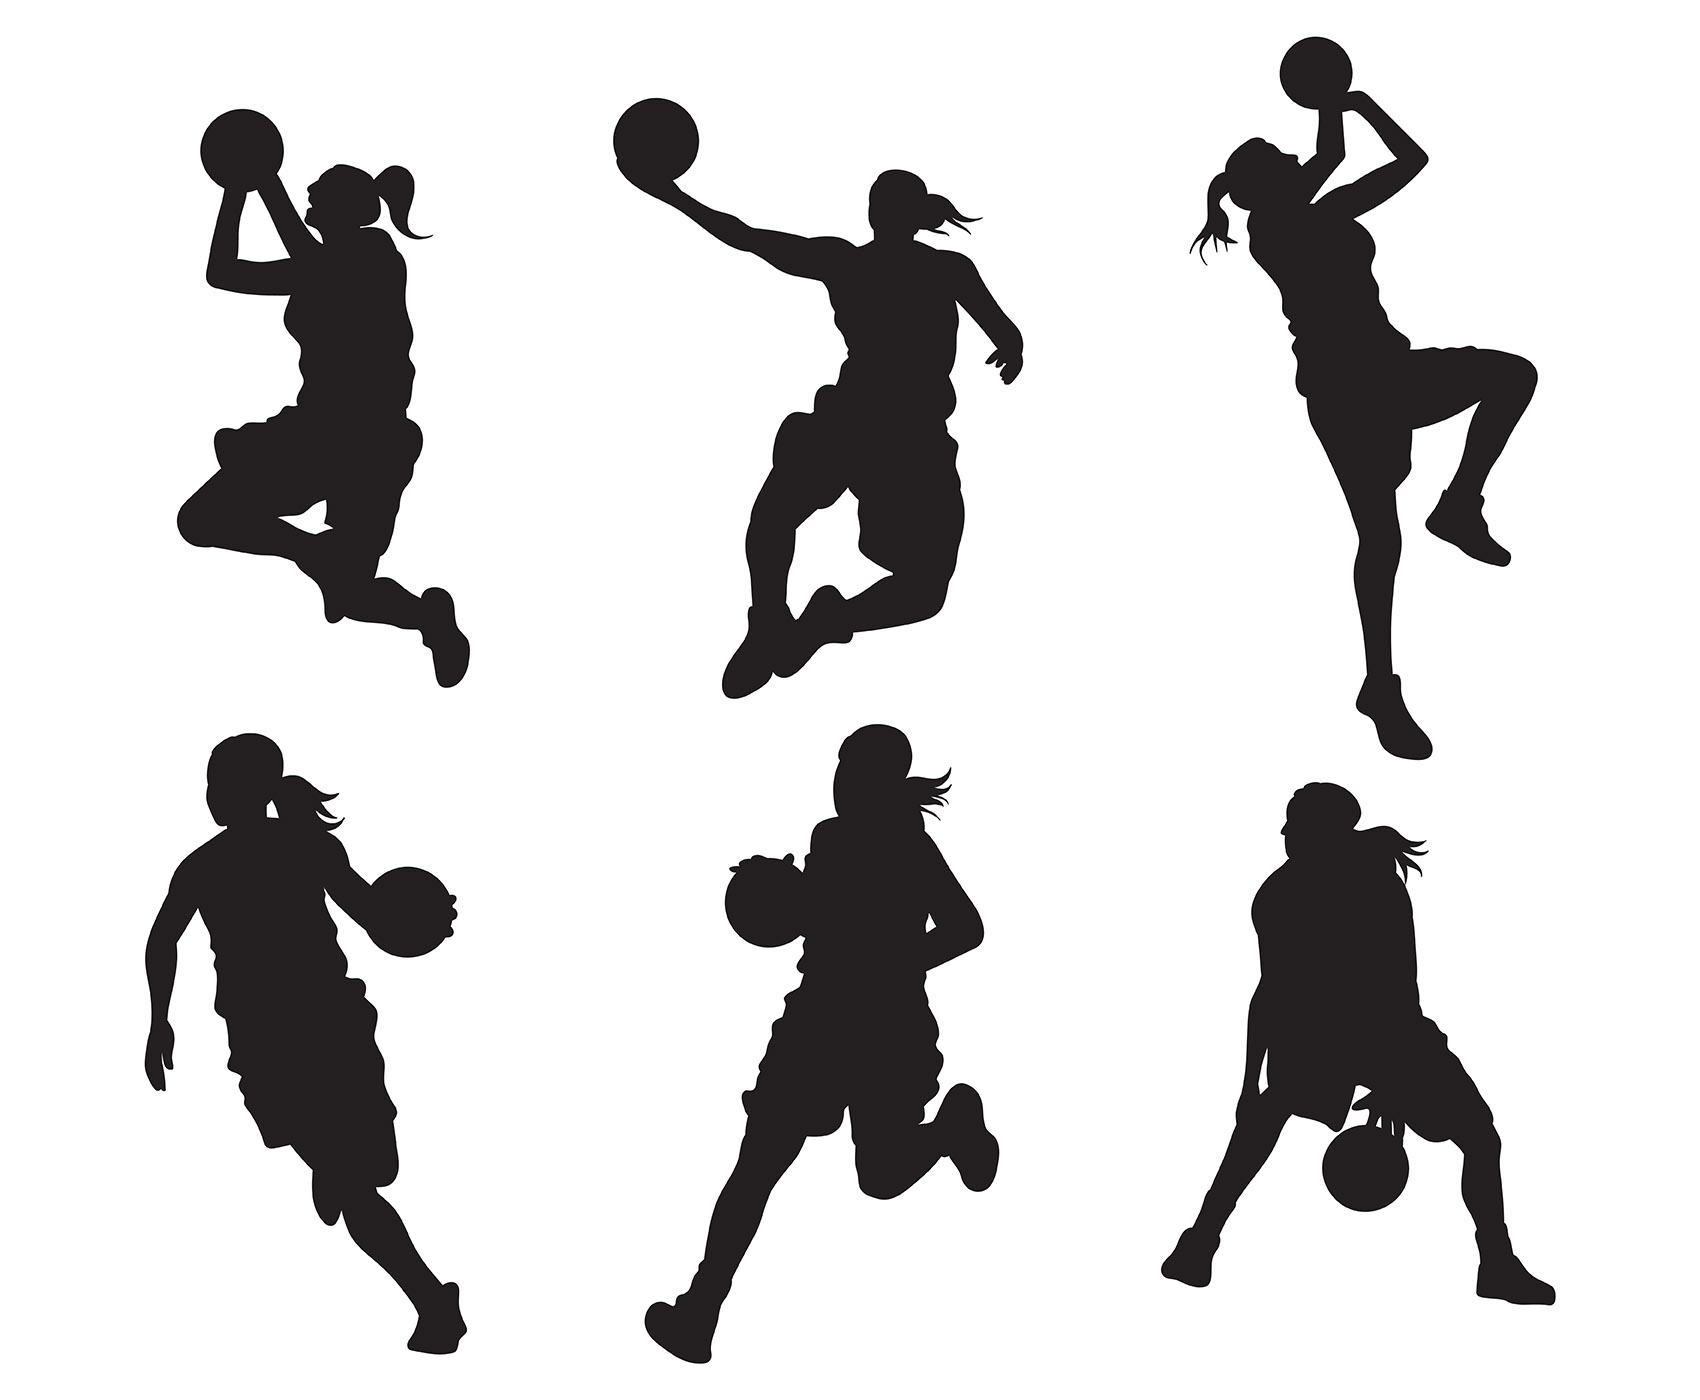 Download Female Basketball Player Silhouette 268480 - Download Free Vectors, Clipart Graphics & Vector Art